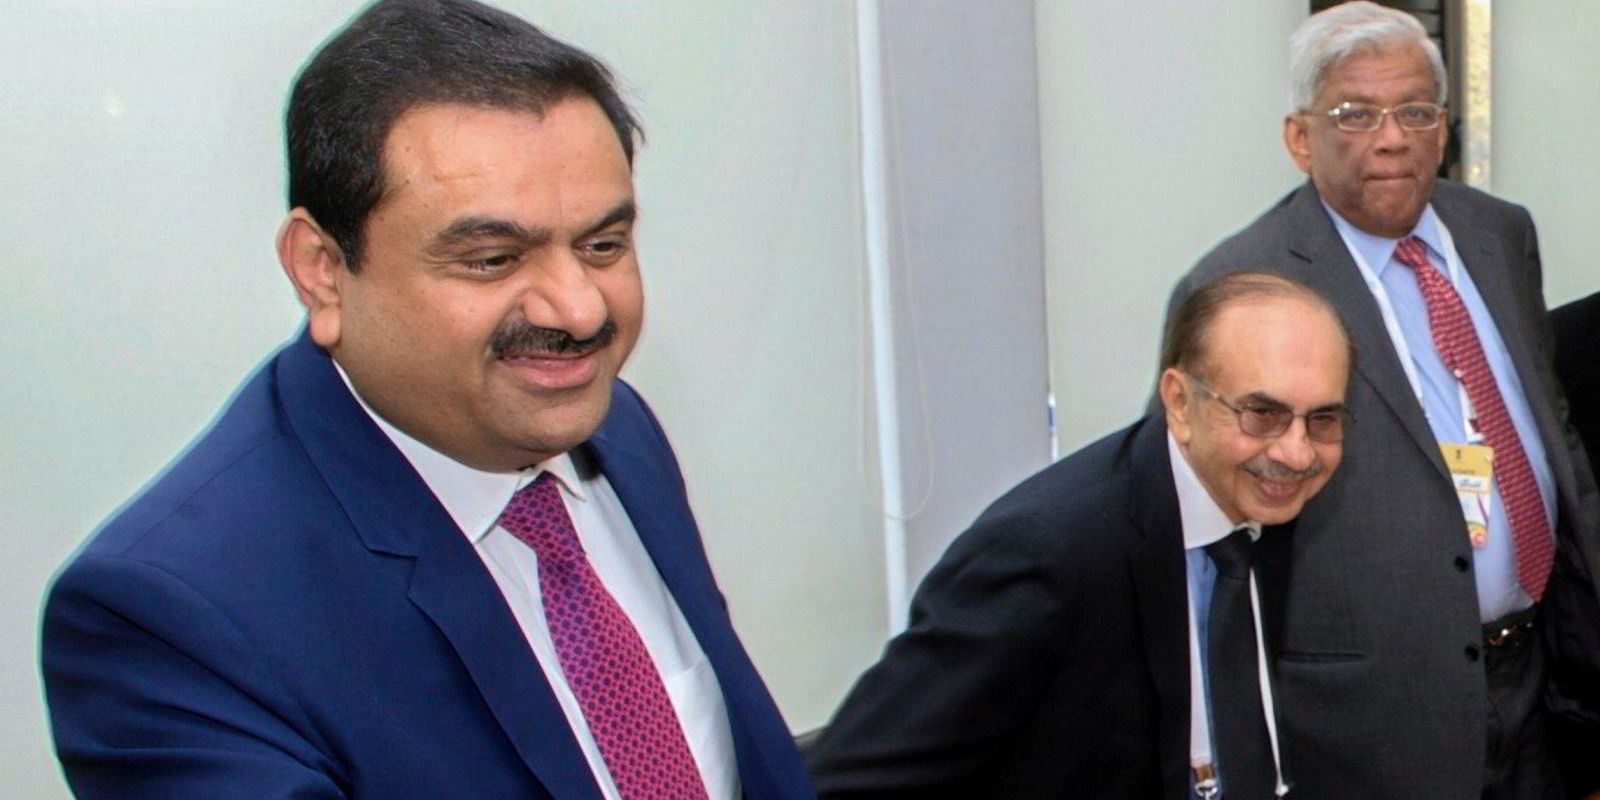 What to know about Gautam Adani and stock rout after Hindenberg